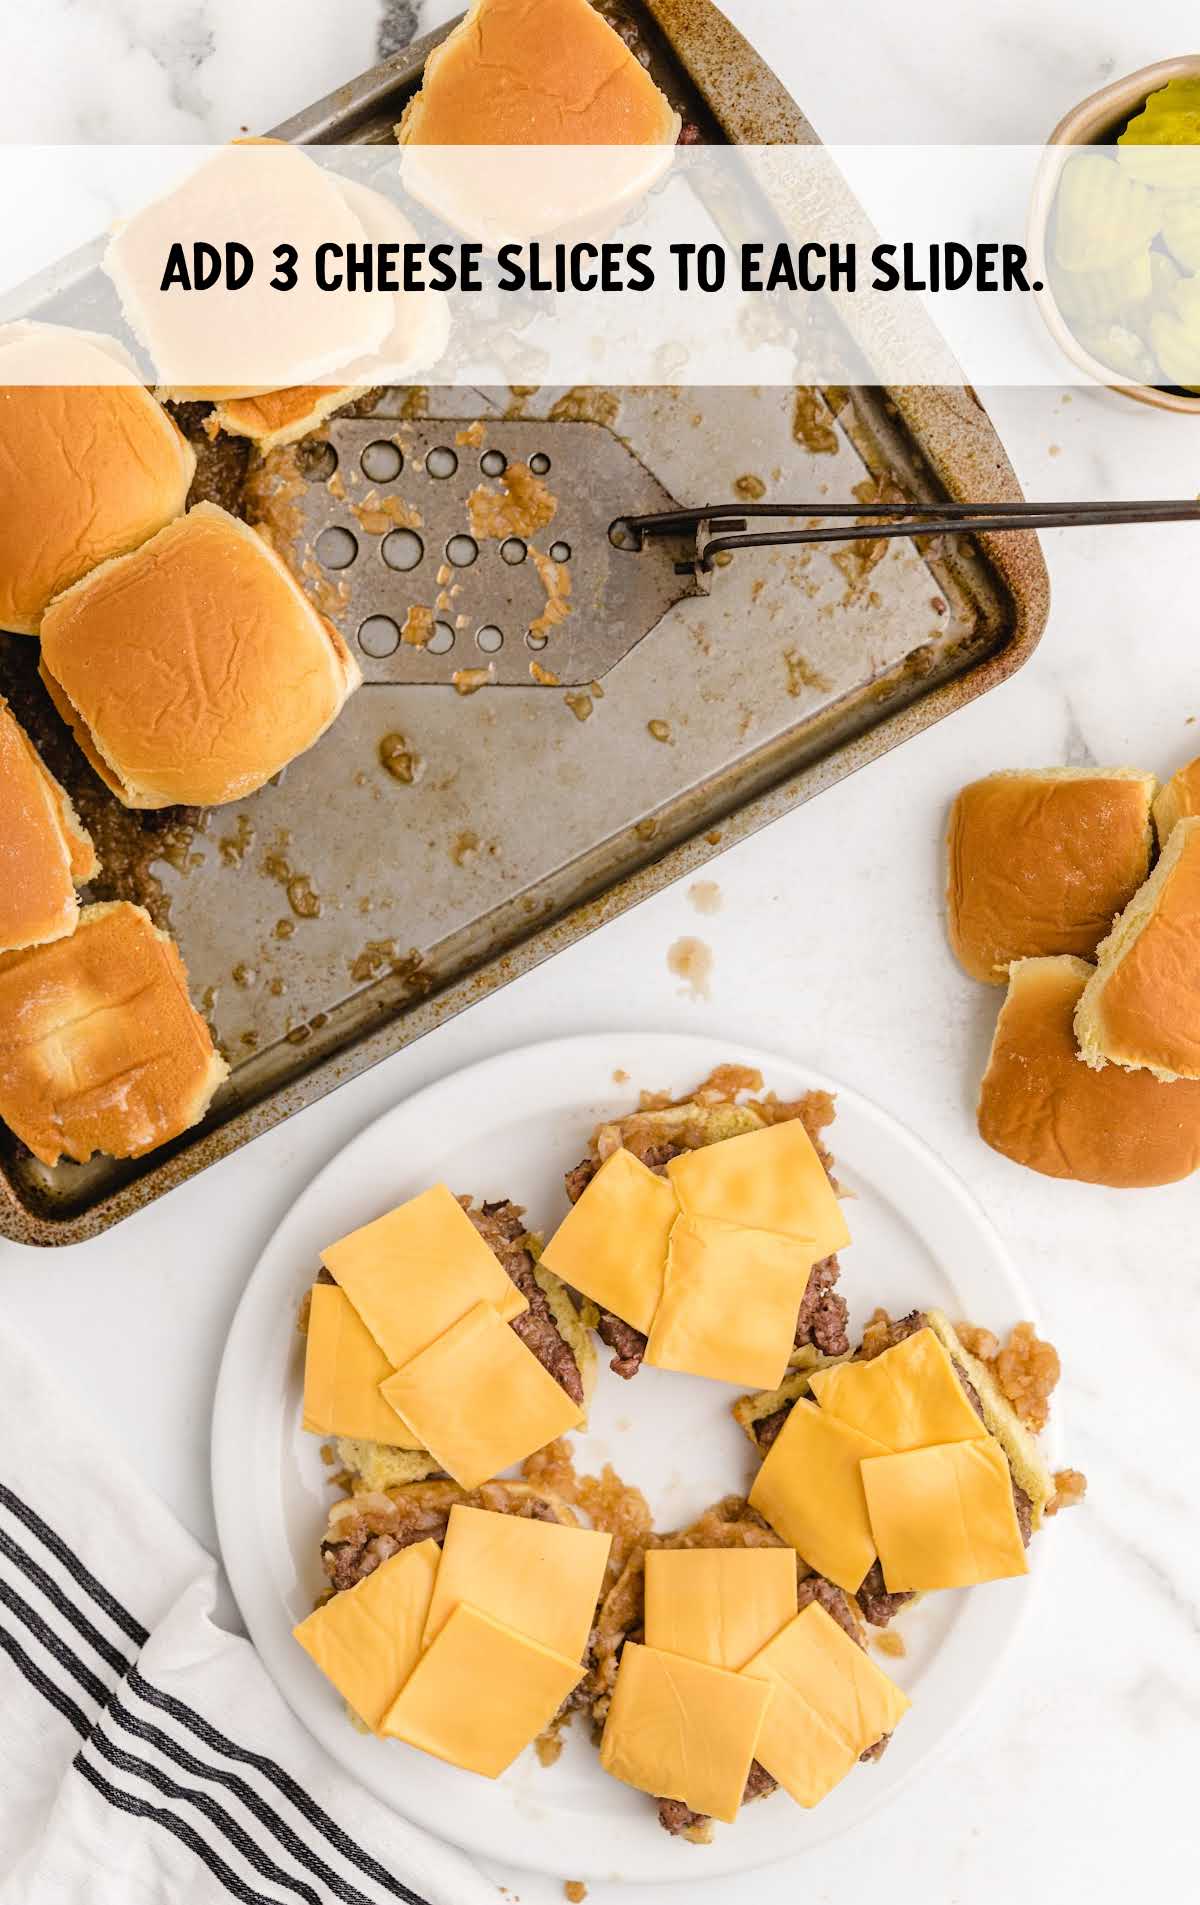 each slider topped with pieces of cheese